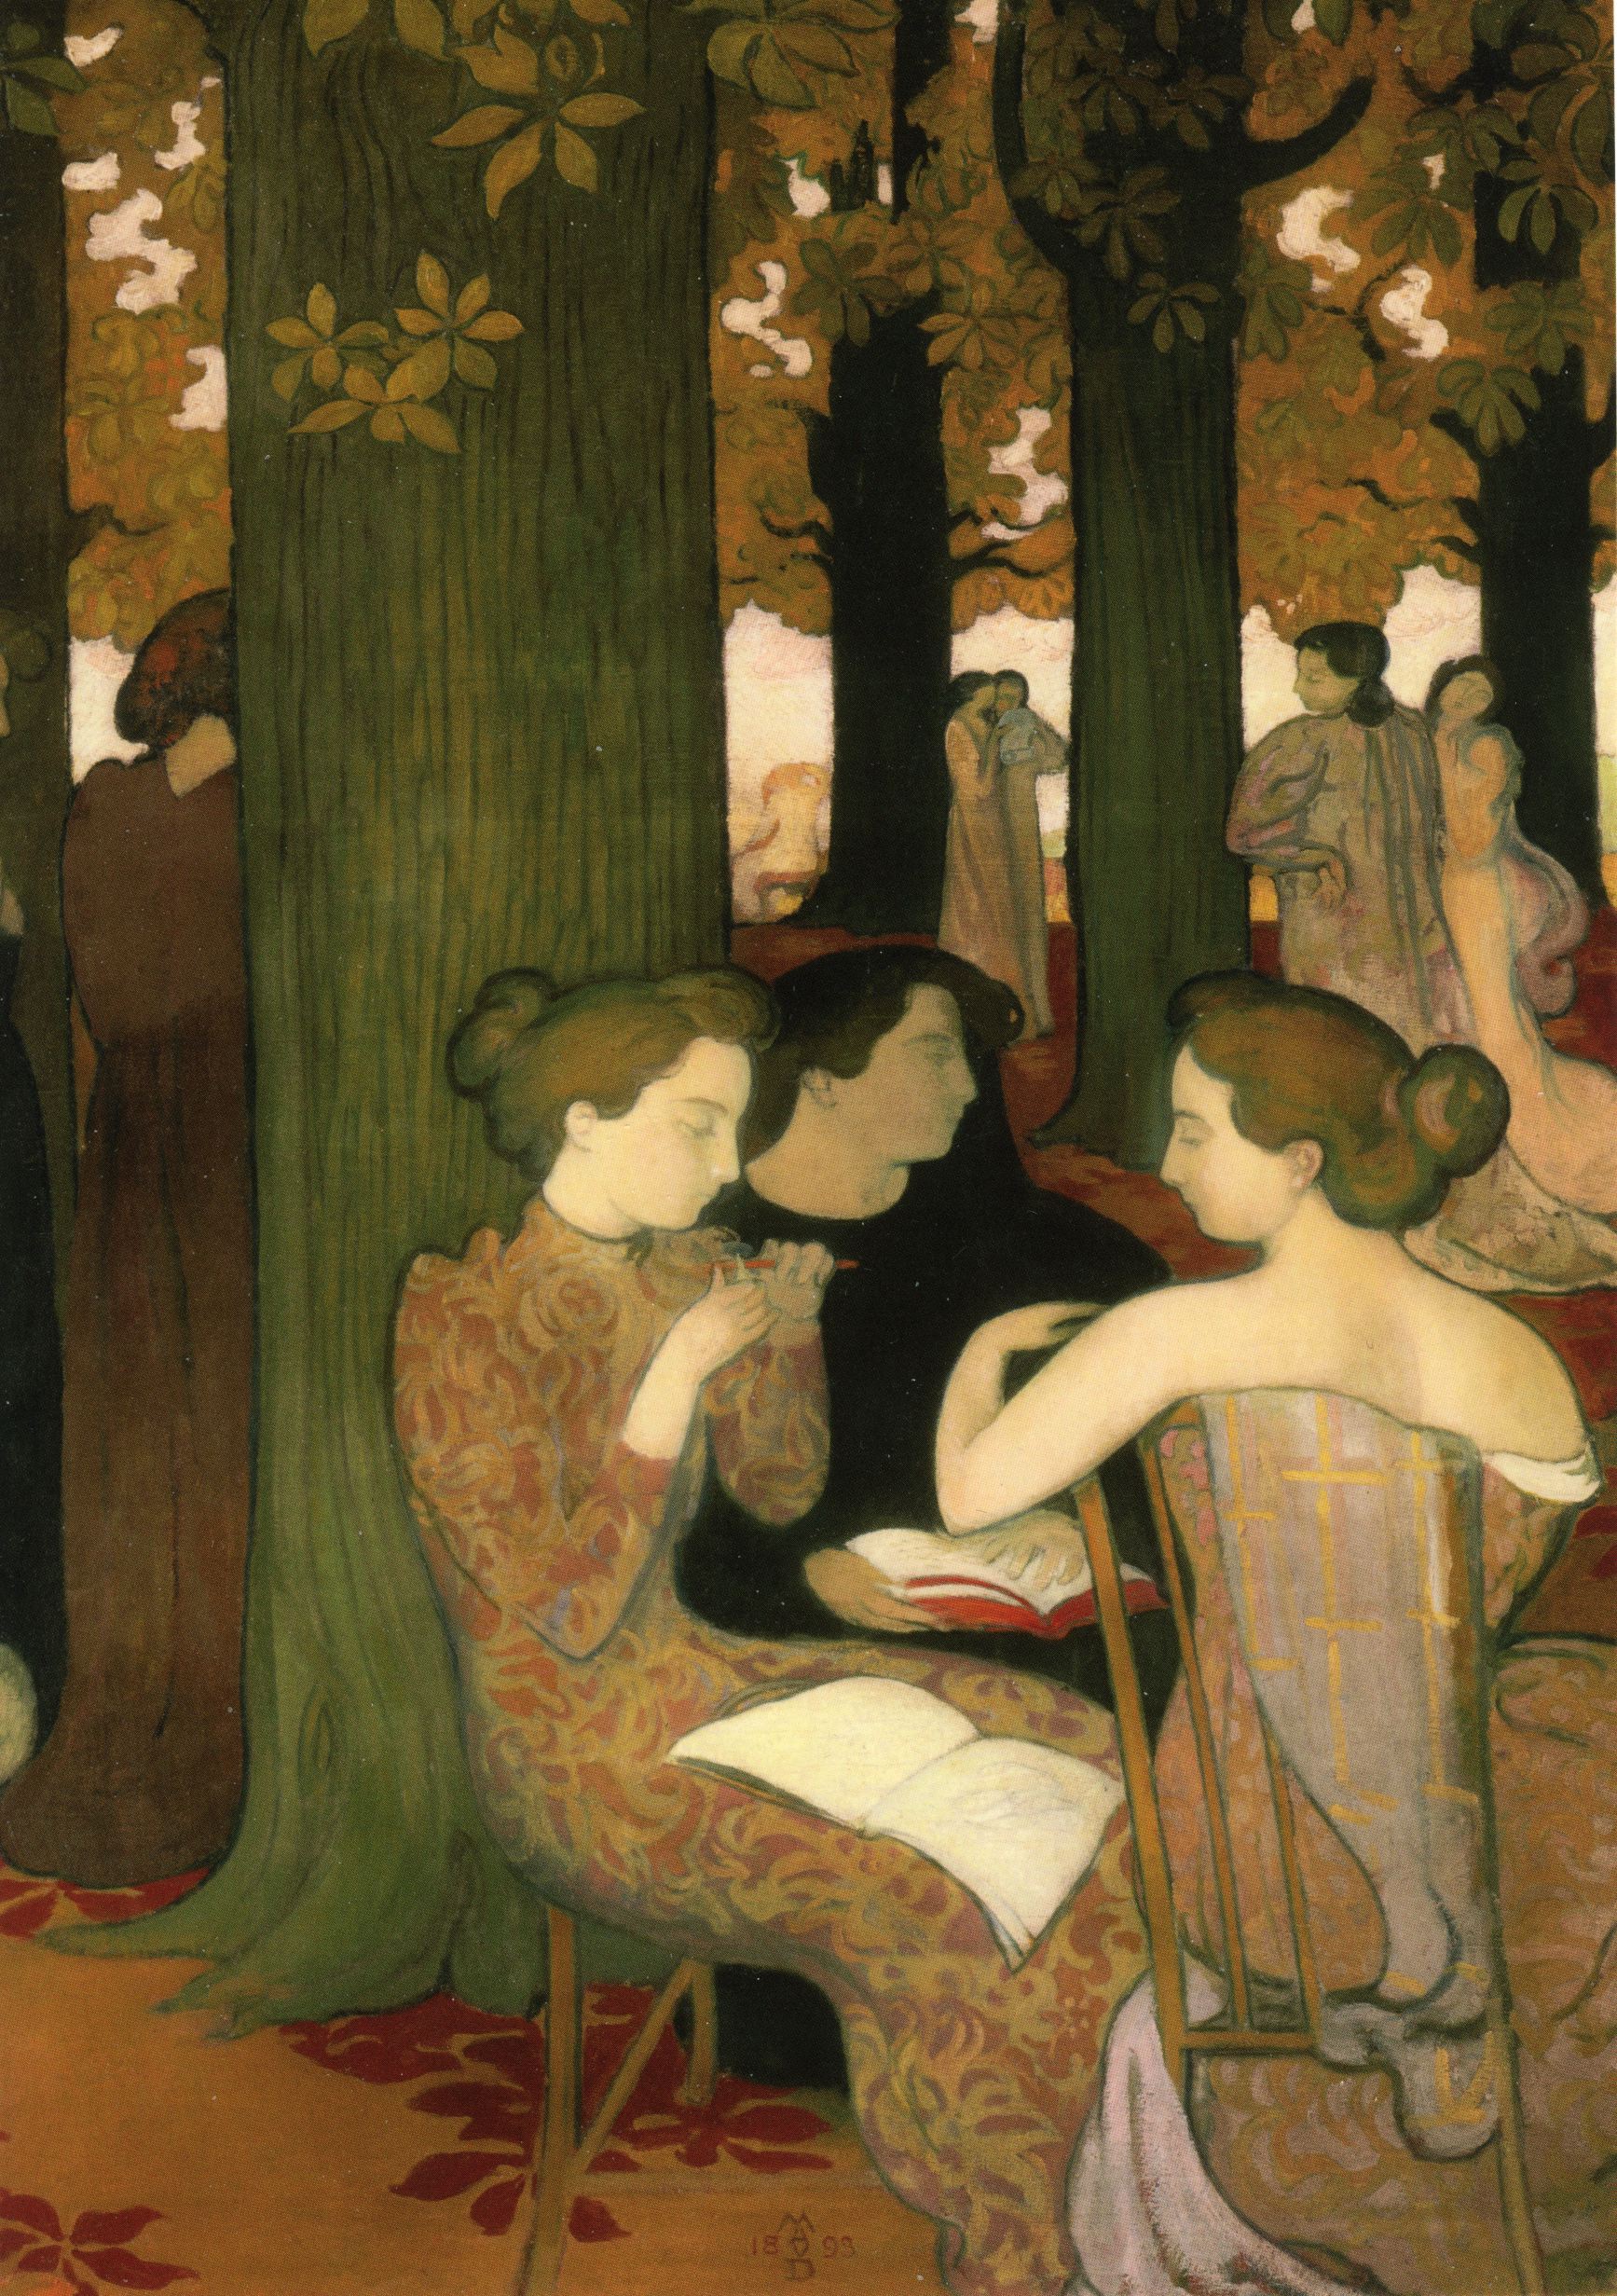 Muse by Maurice Denis - 1893 - 171.5 x 137.5 cm Musée d'Orsay